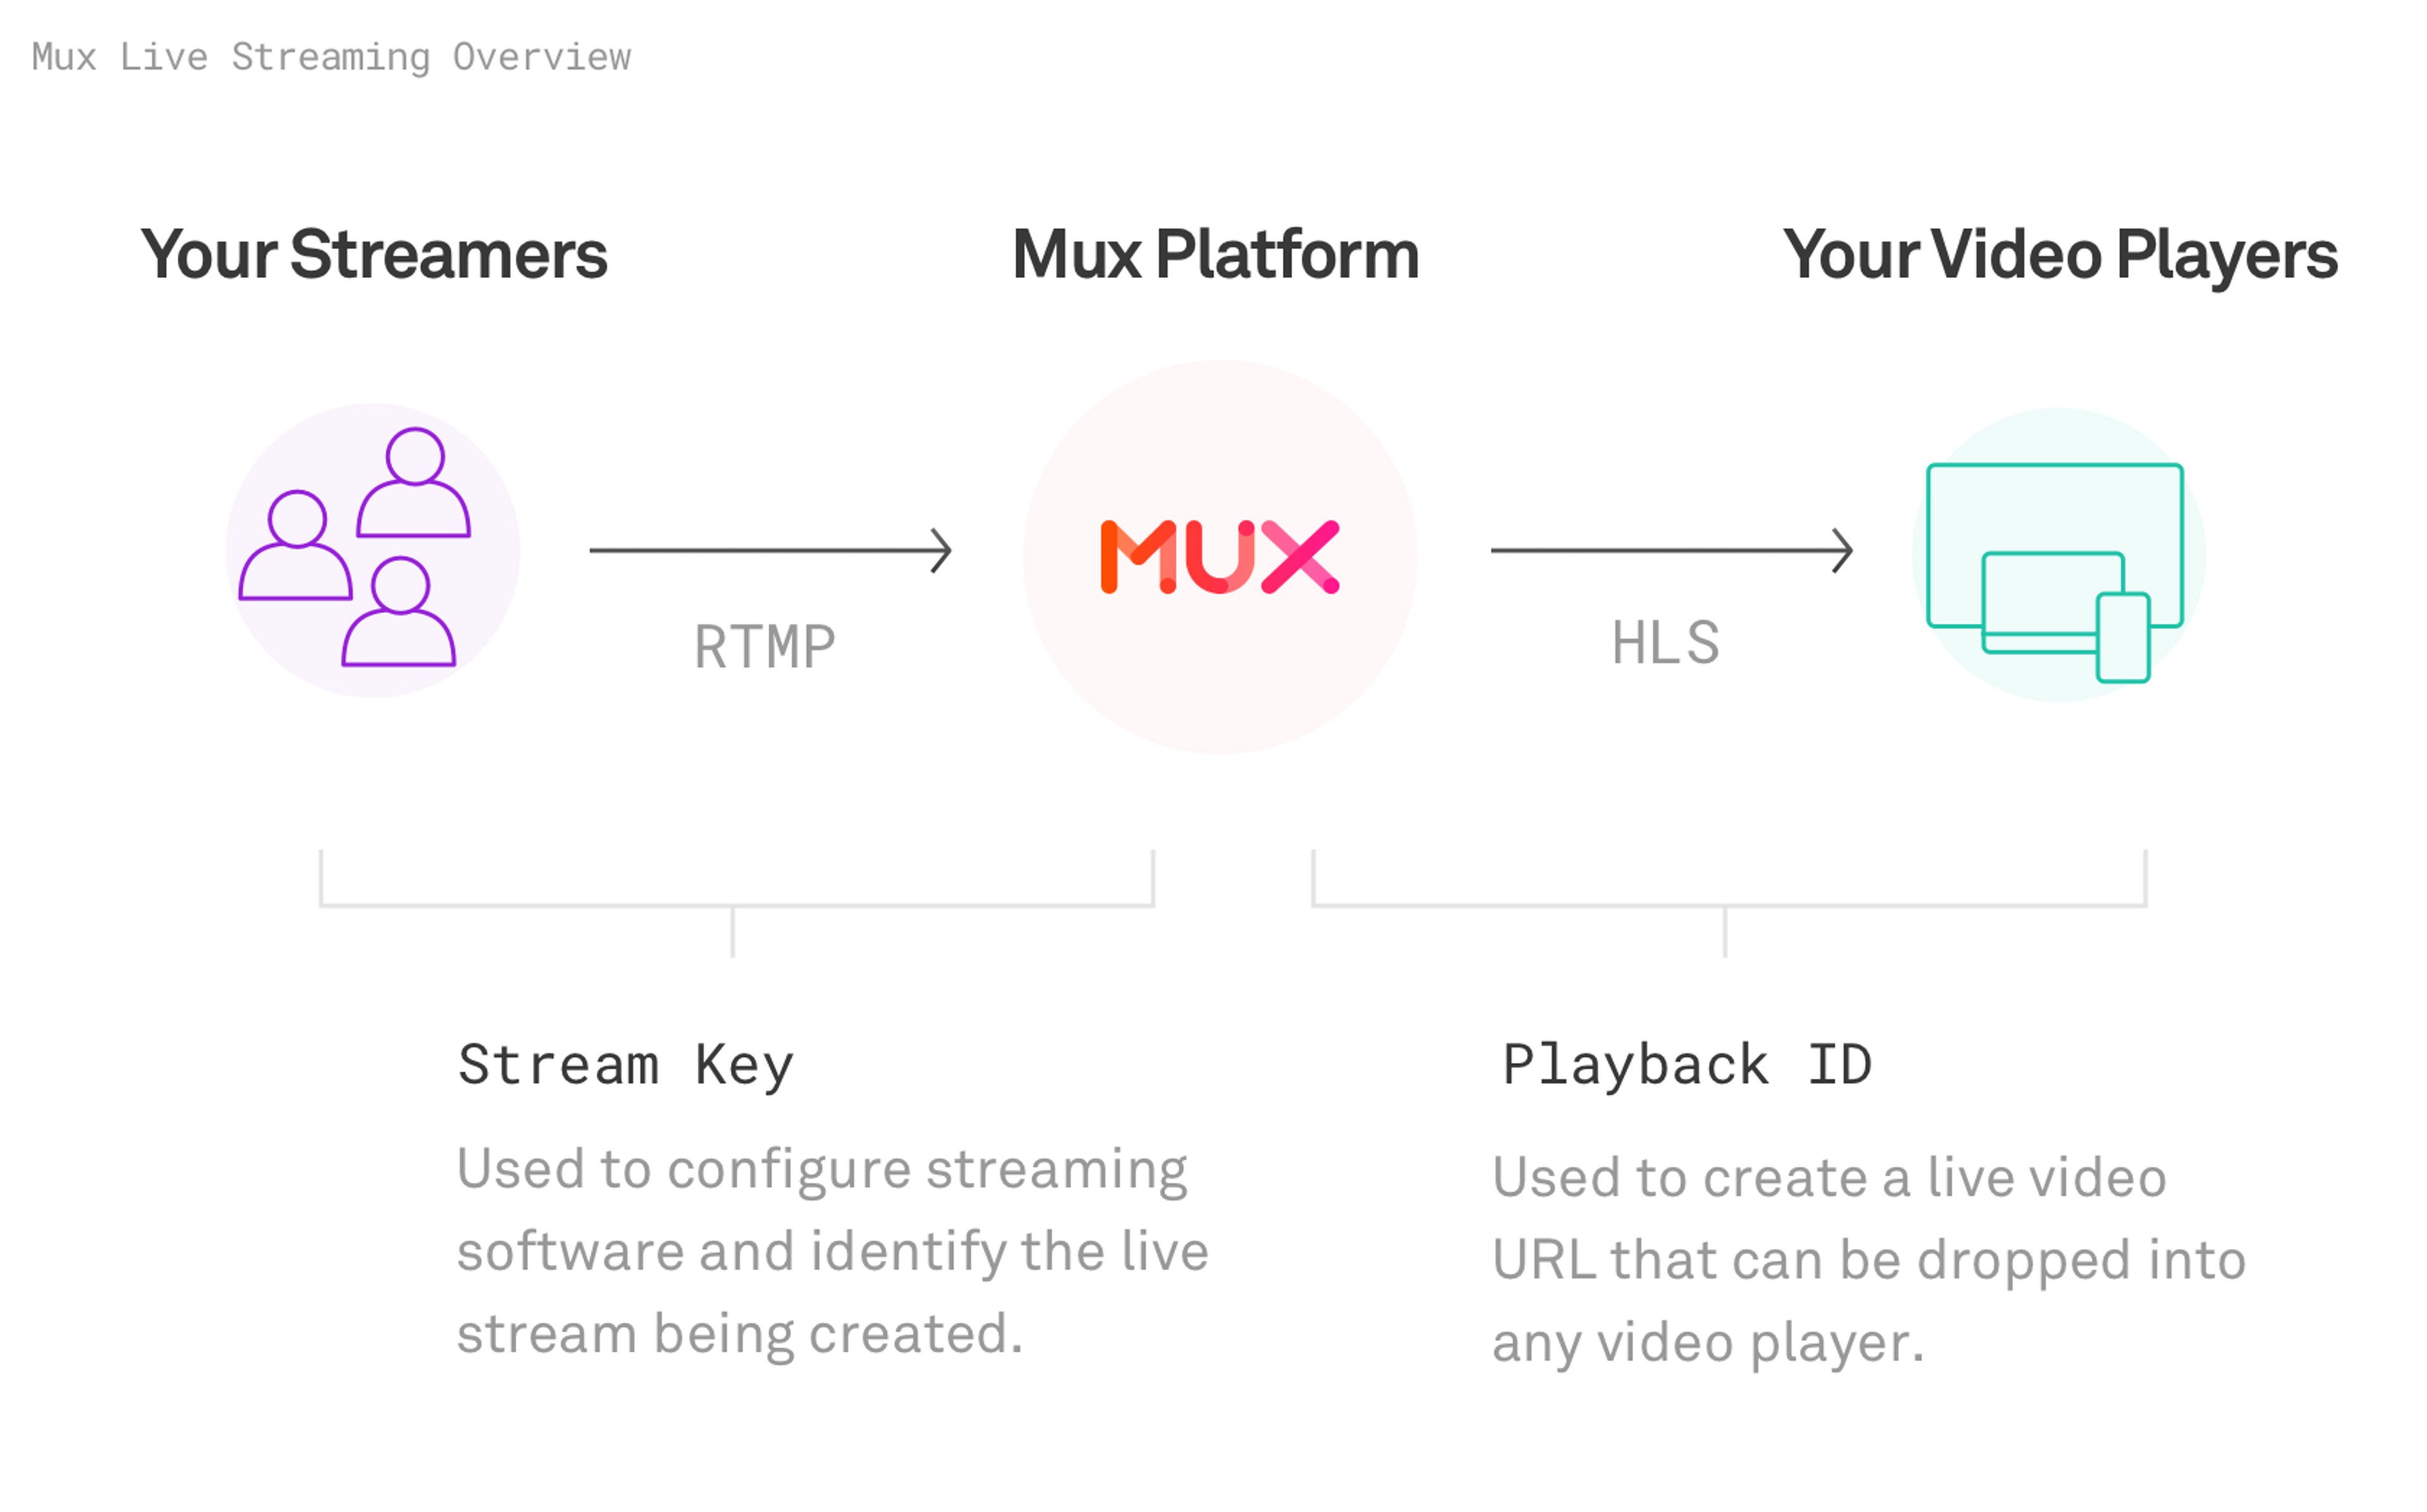 Mux live streaming overview